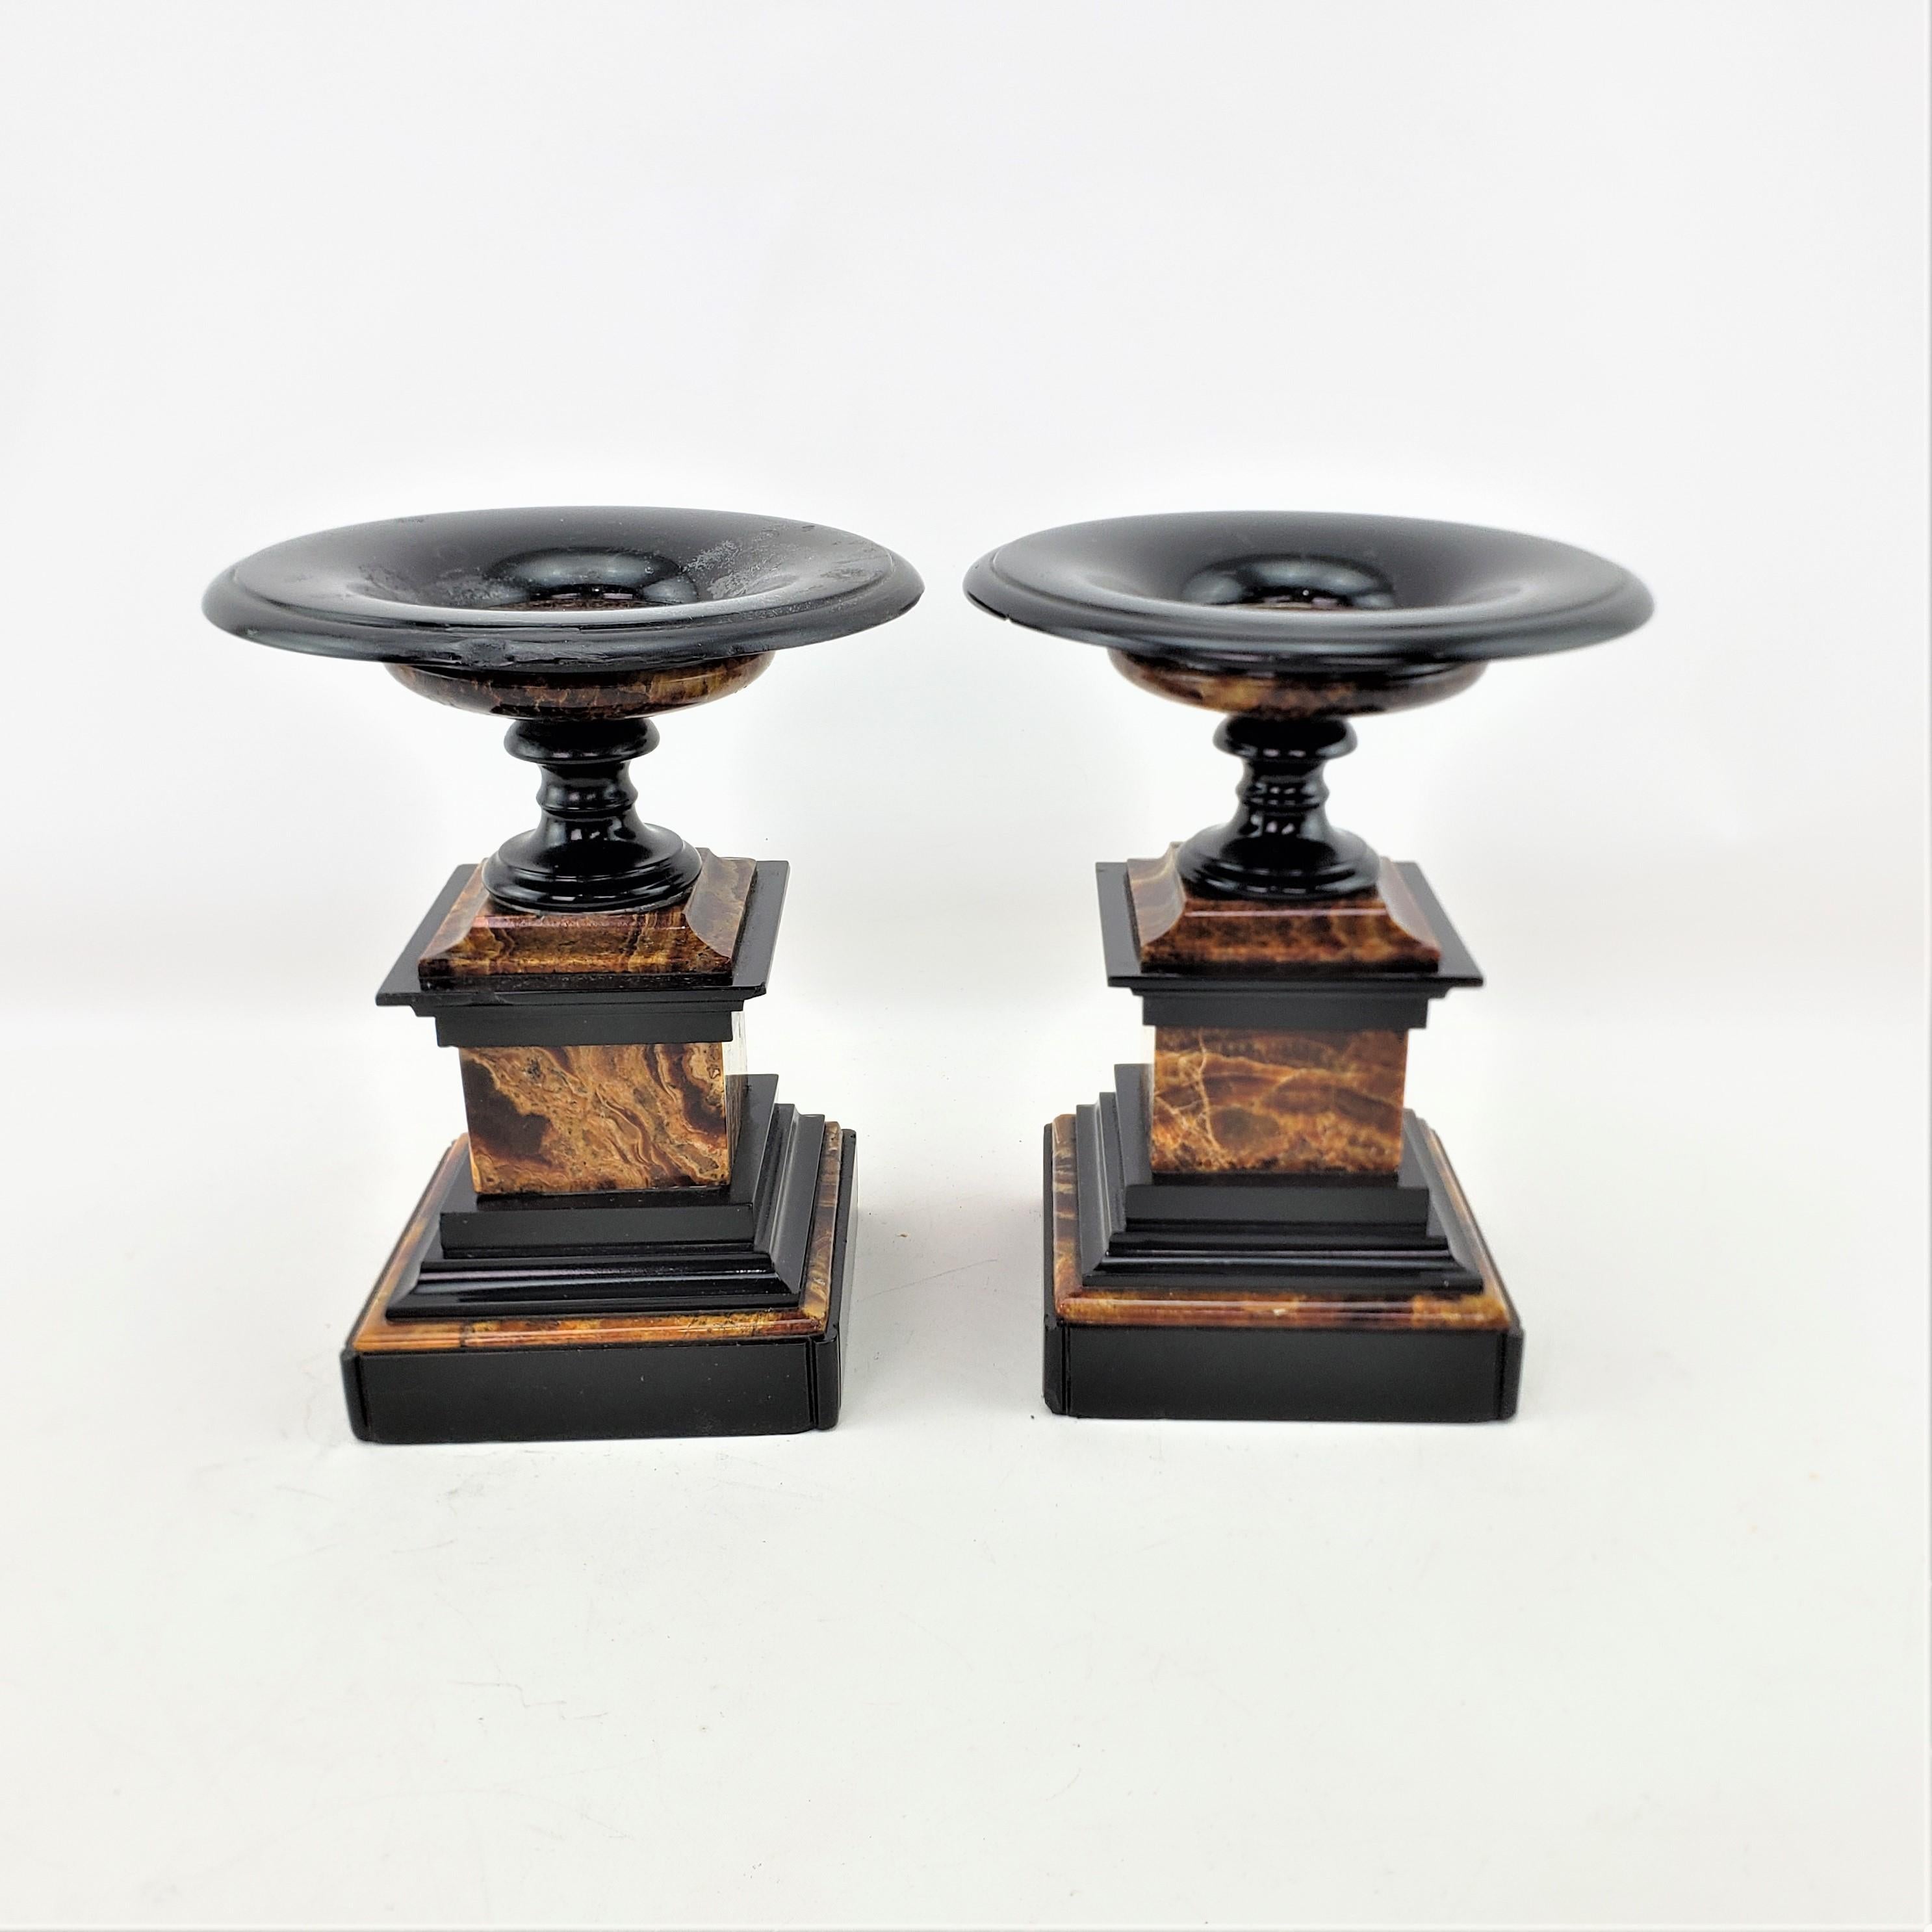 20th Century Pair of Antique French Polished Slate & Marble Garniture Set or Tazzas For Sale